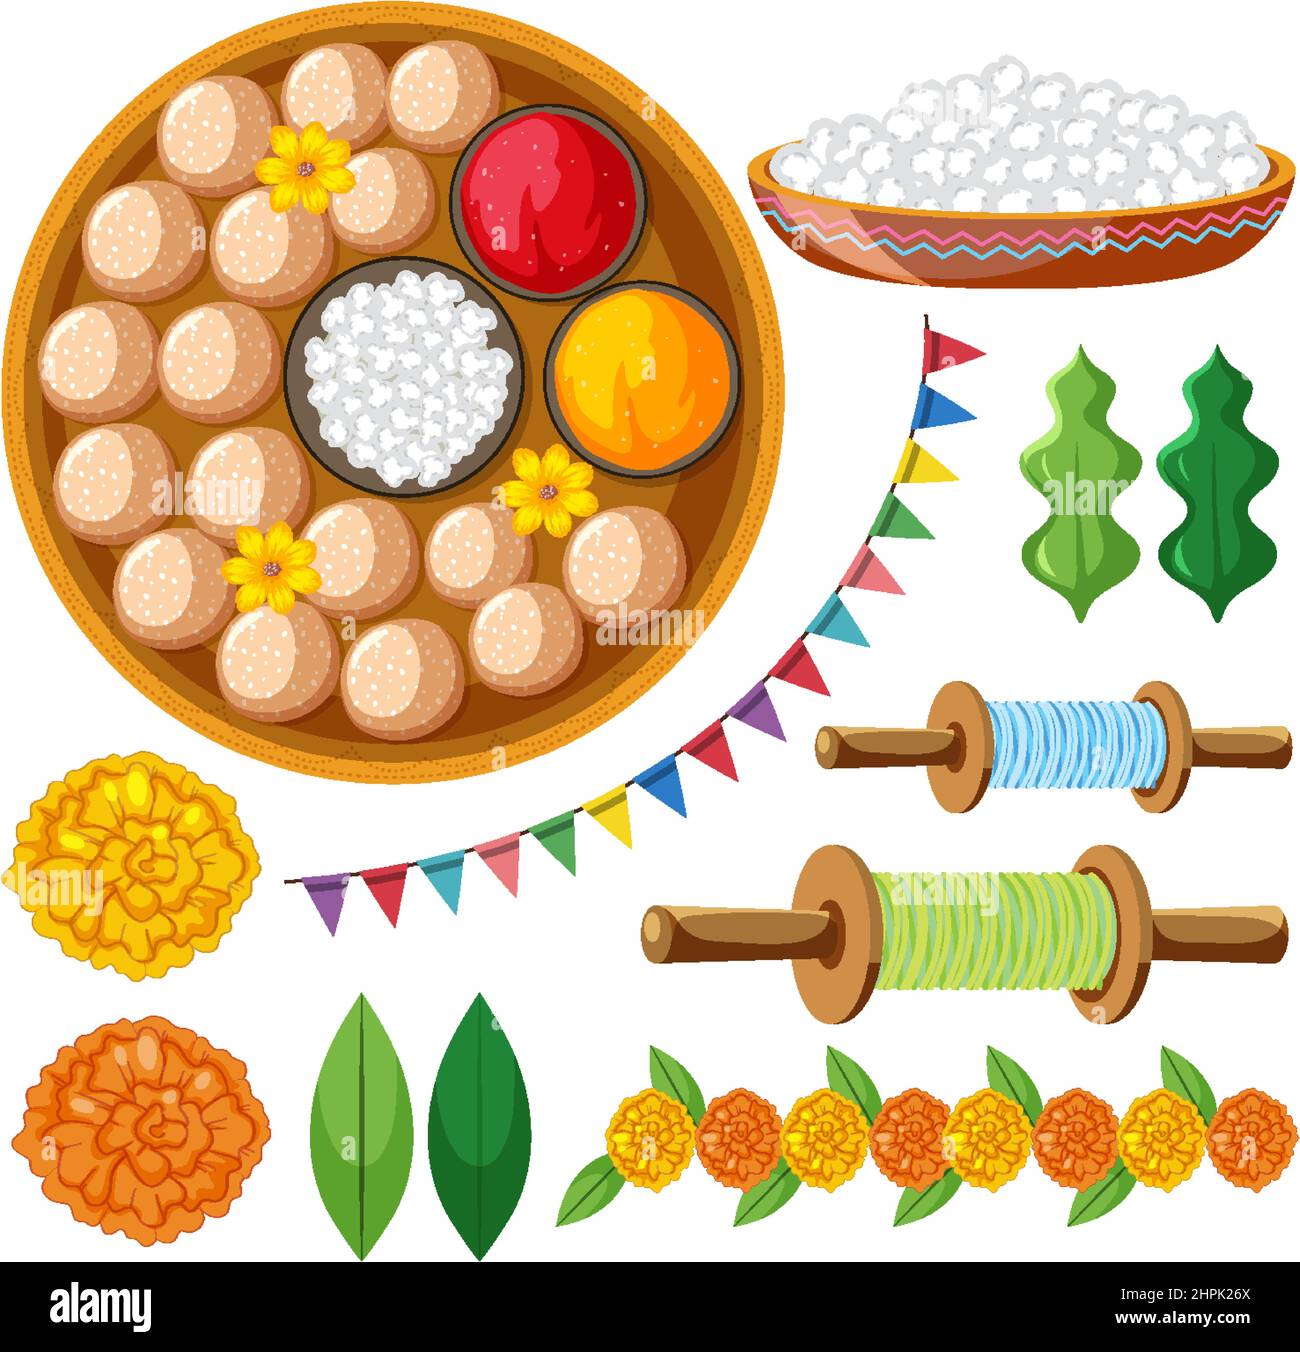 Set of Indian food and offerings illustration Stock Vector